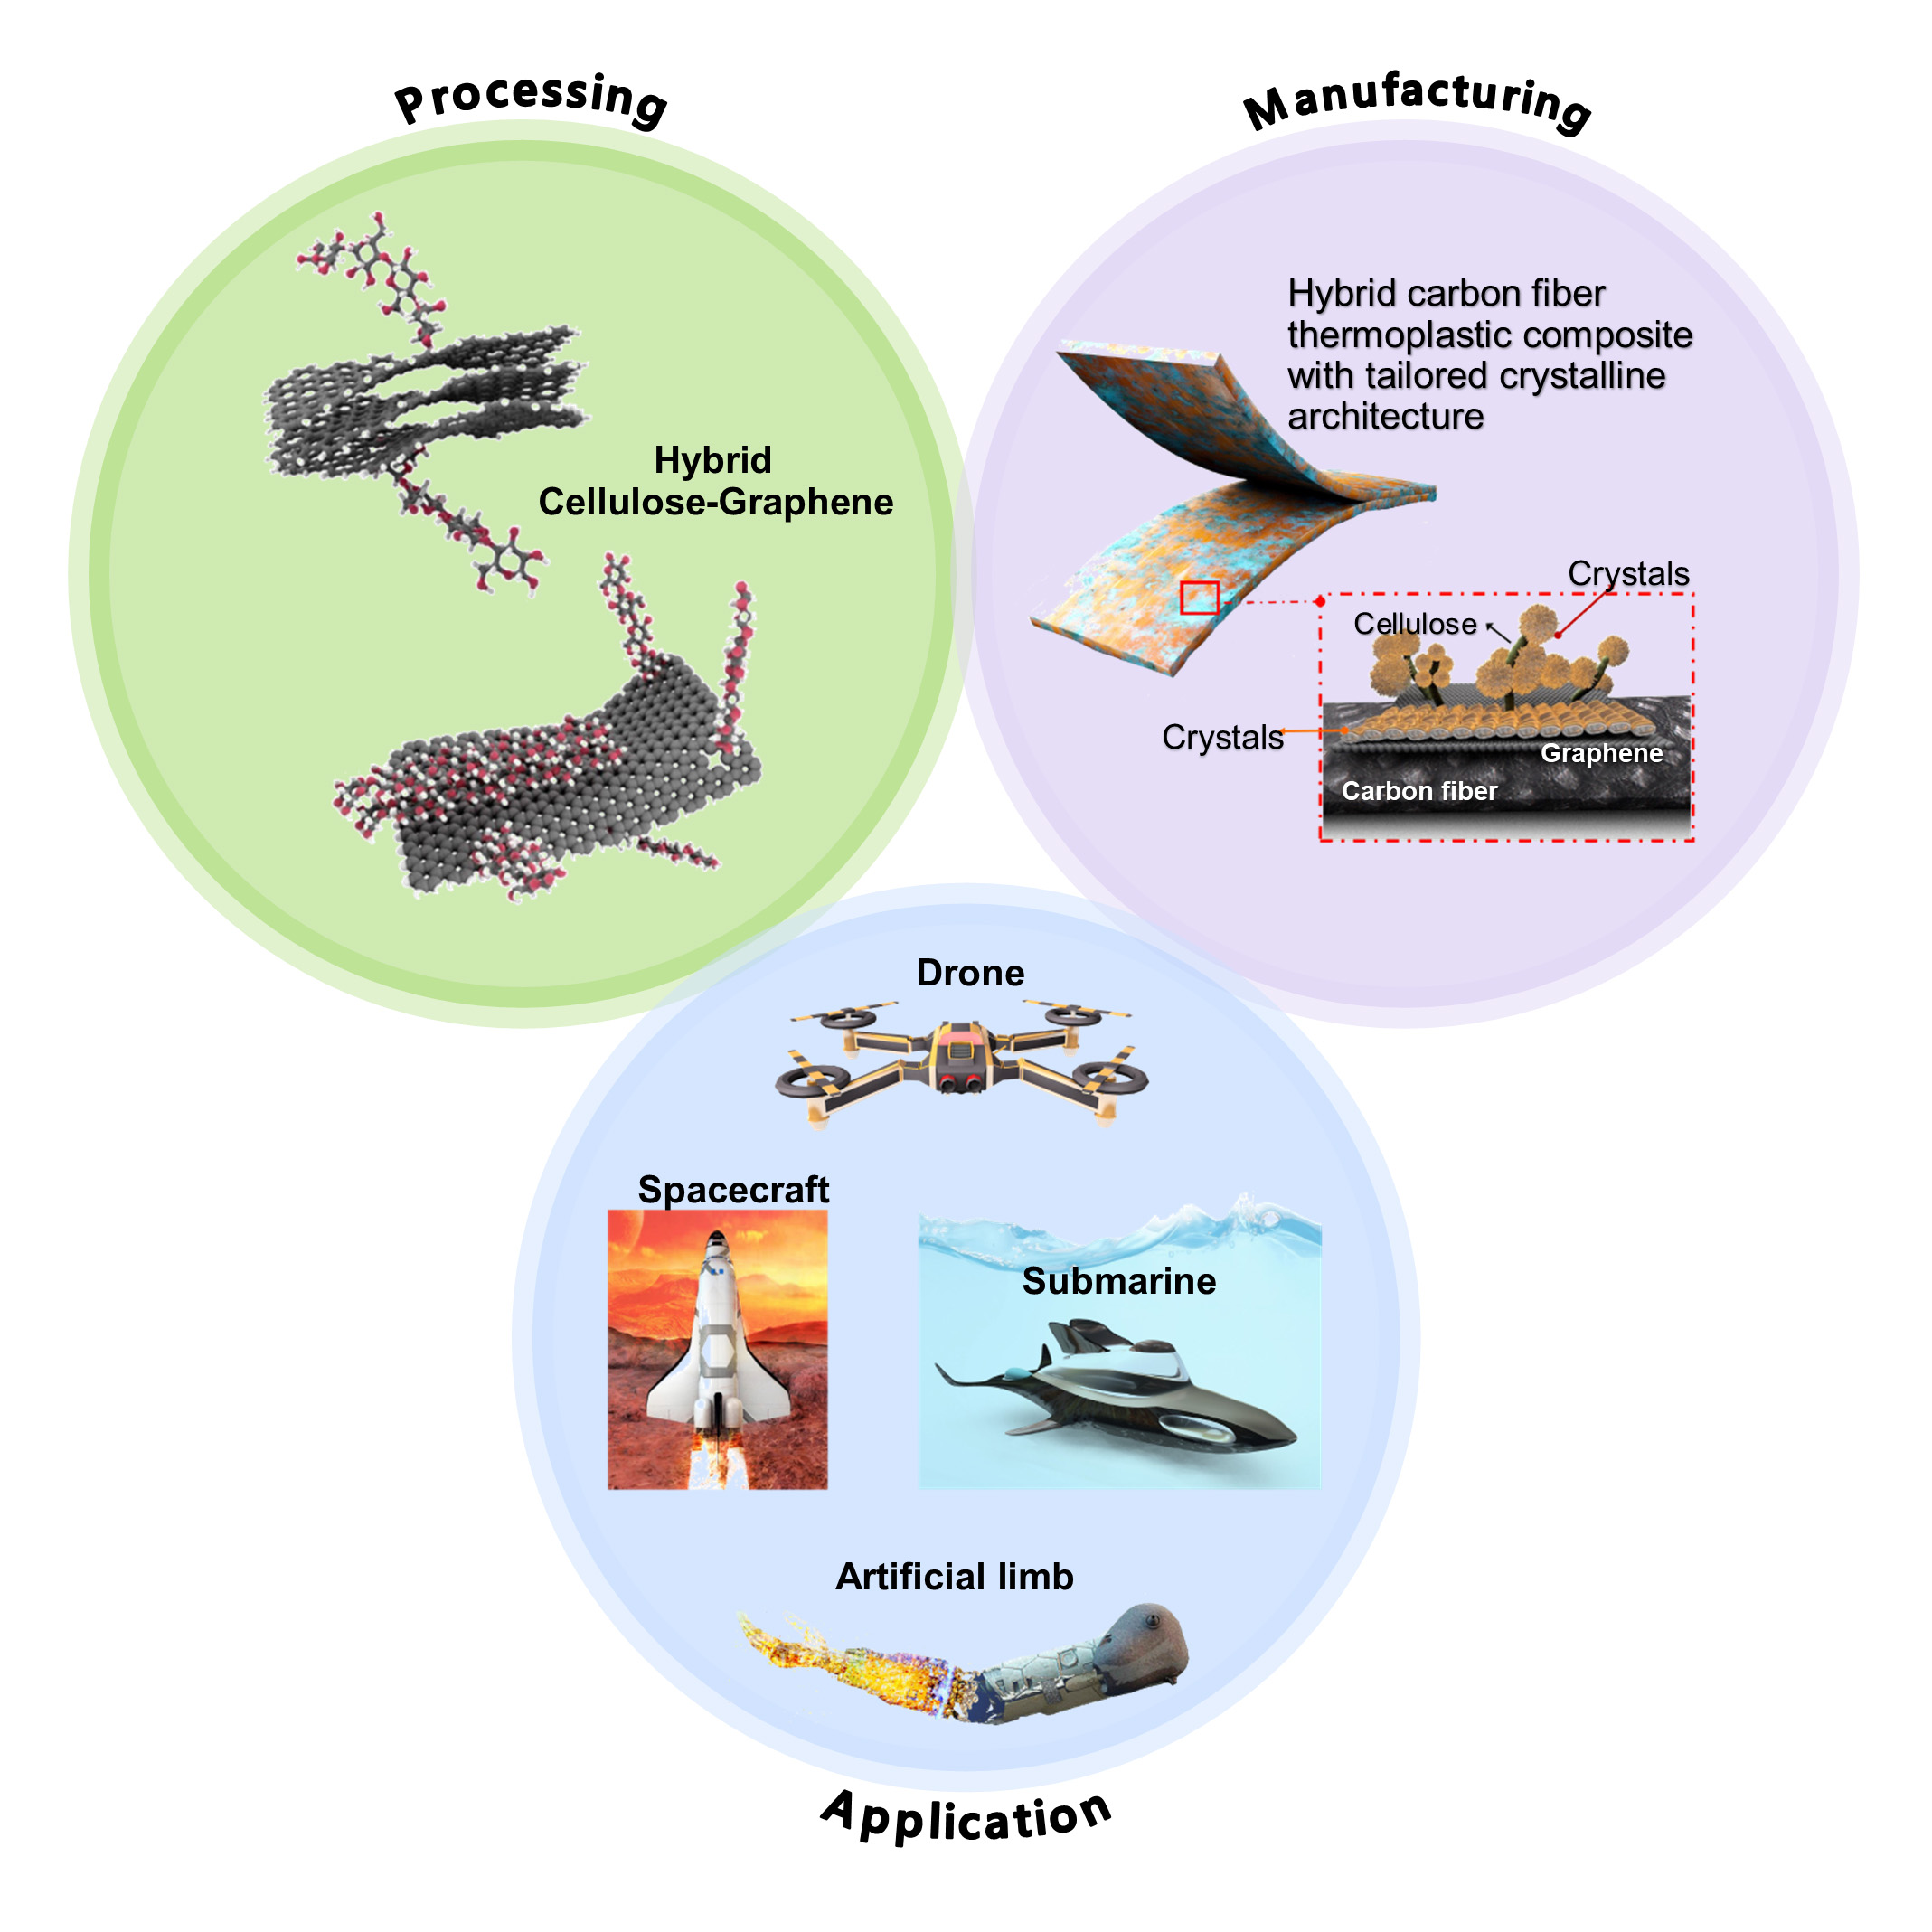 Graphic that shows three circles labeled Processing, Manufacturing, and Application.  Within the Processing circle there are images of Hybrid Celullose-Graphene  Within the Manufacturing circle there are images of Hybrid Carbon Fiber Thermoplastic Composites  Within the Application circle there are images of a drone, a spacecraft, a submarine, and an artificial limb.